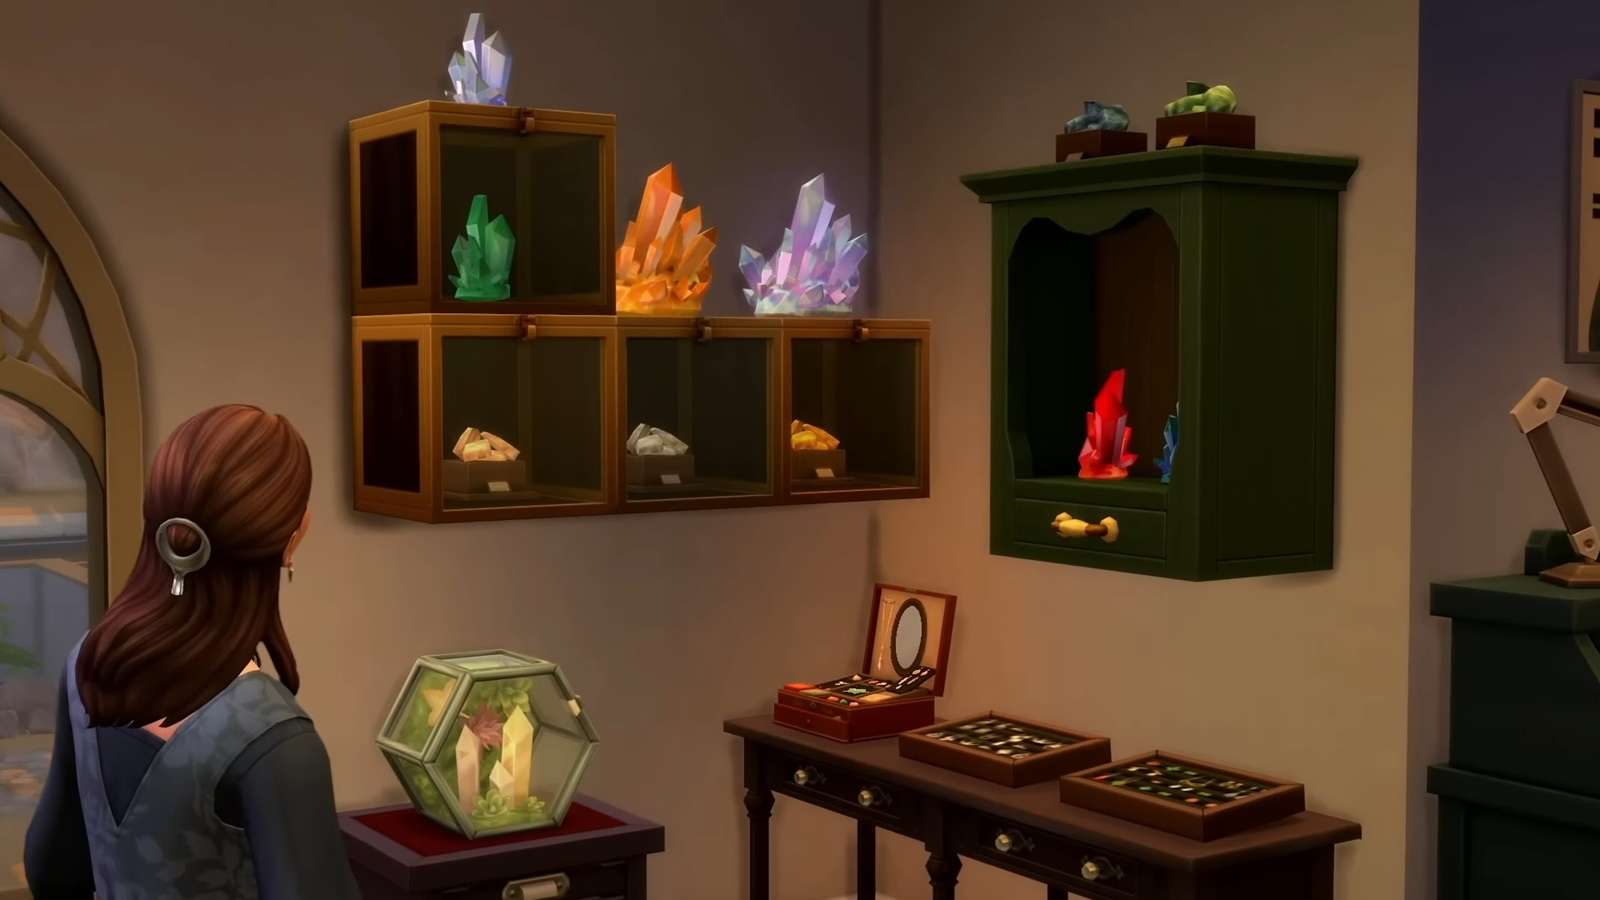 The Sims 4 Crystal Creations Stuff Pack